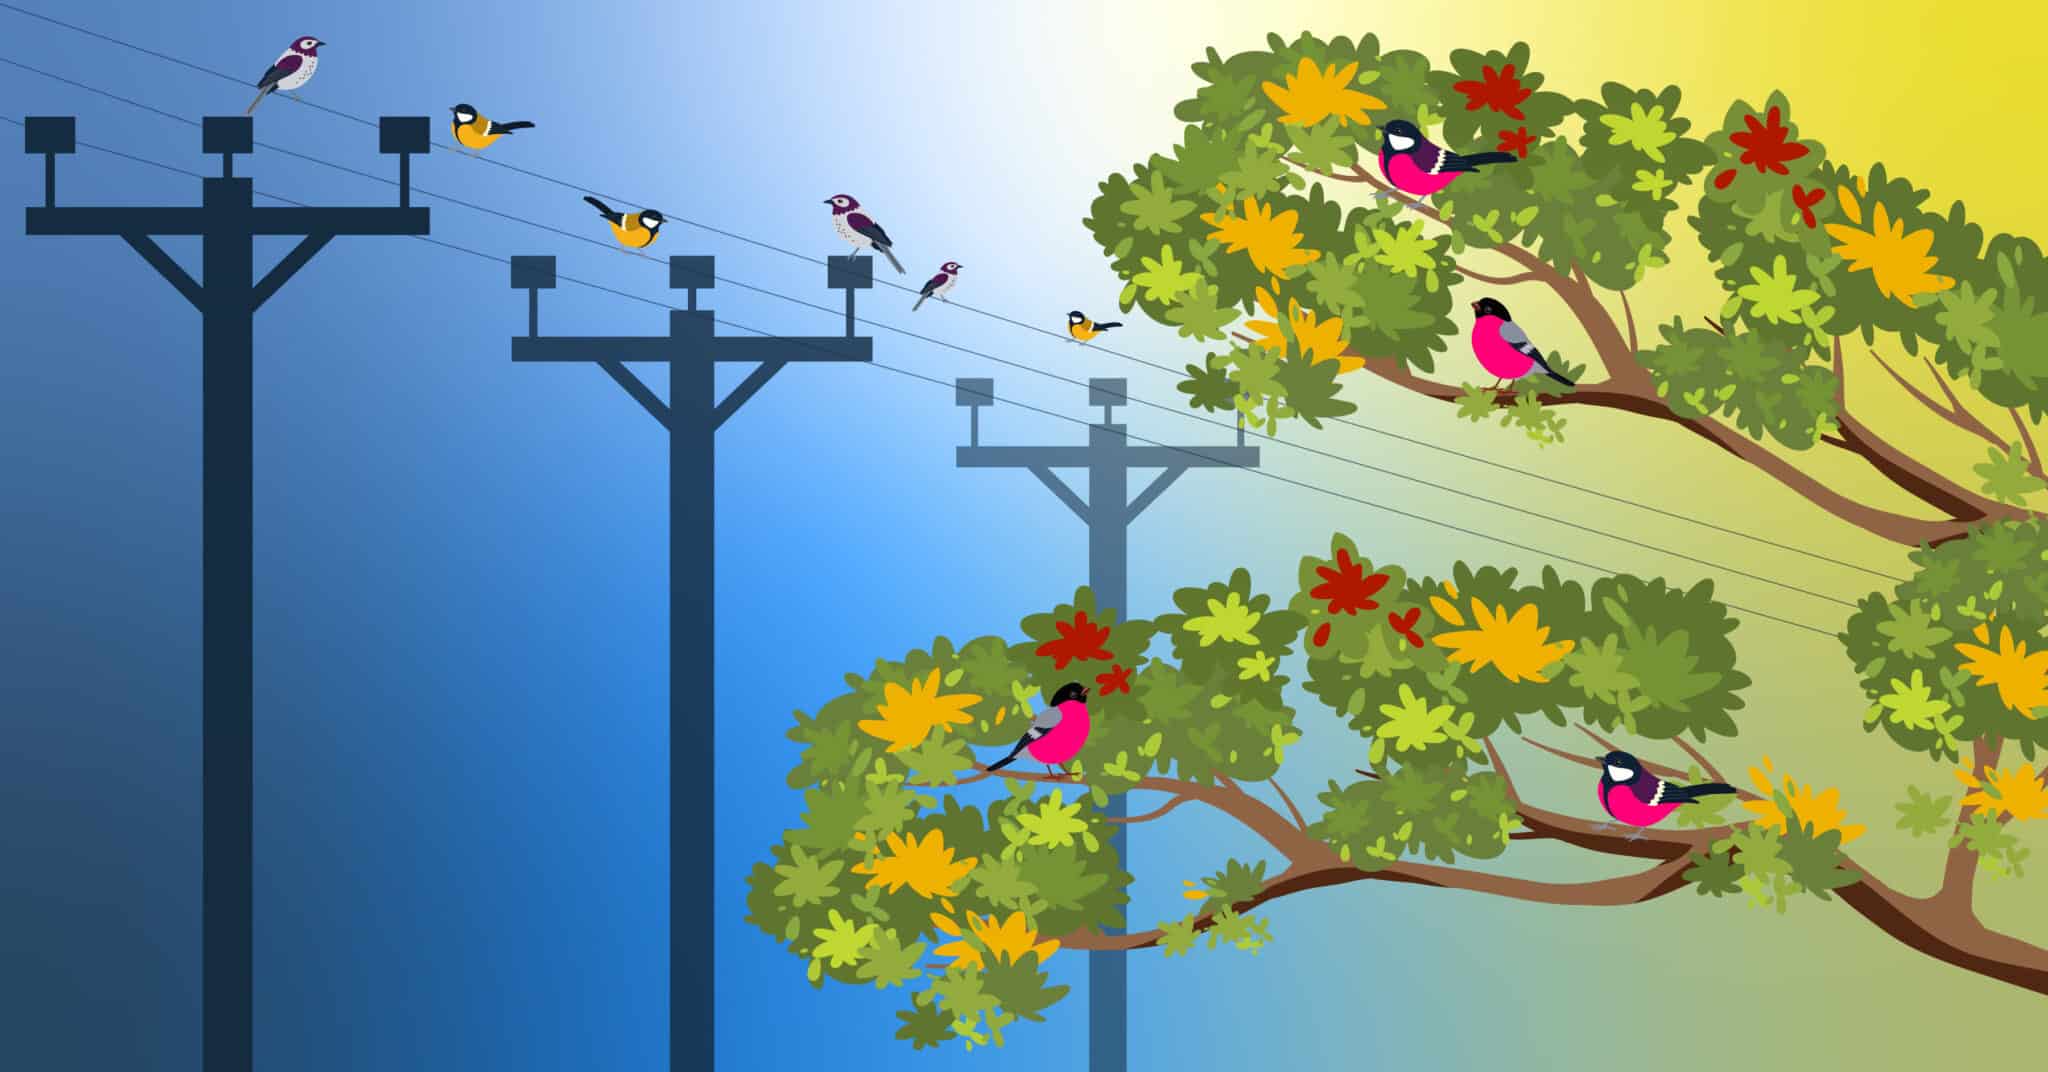 Power lines and poles span the left side of the image with birds along the power wires against blue while the right side gradients to yellow with tree branches with birds resting in the leaves sheltered from the falling snow